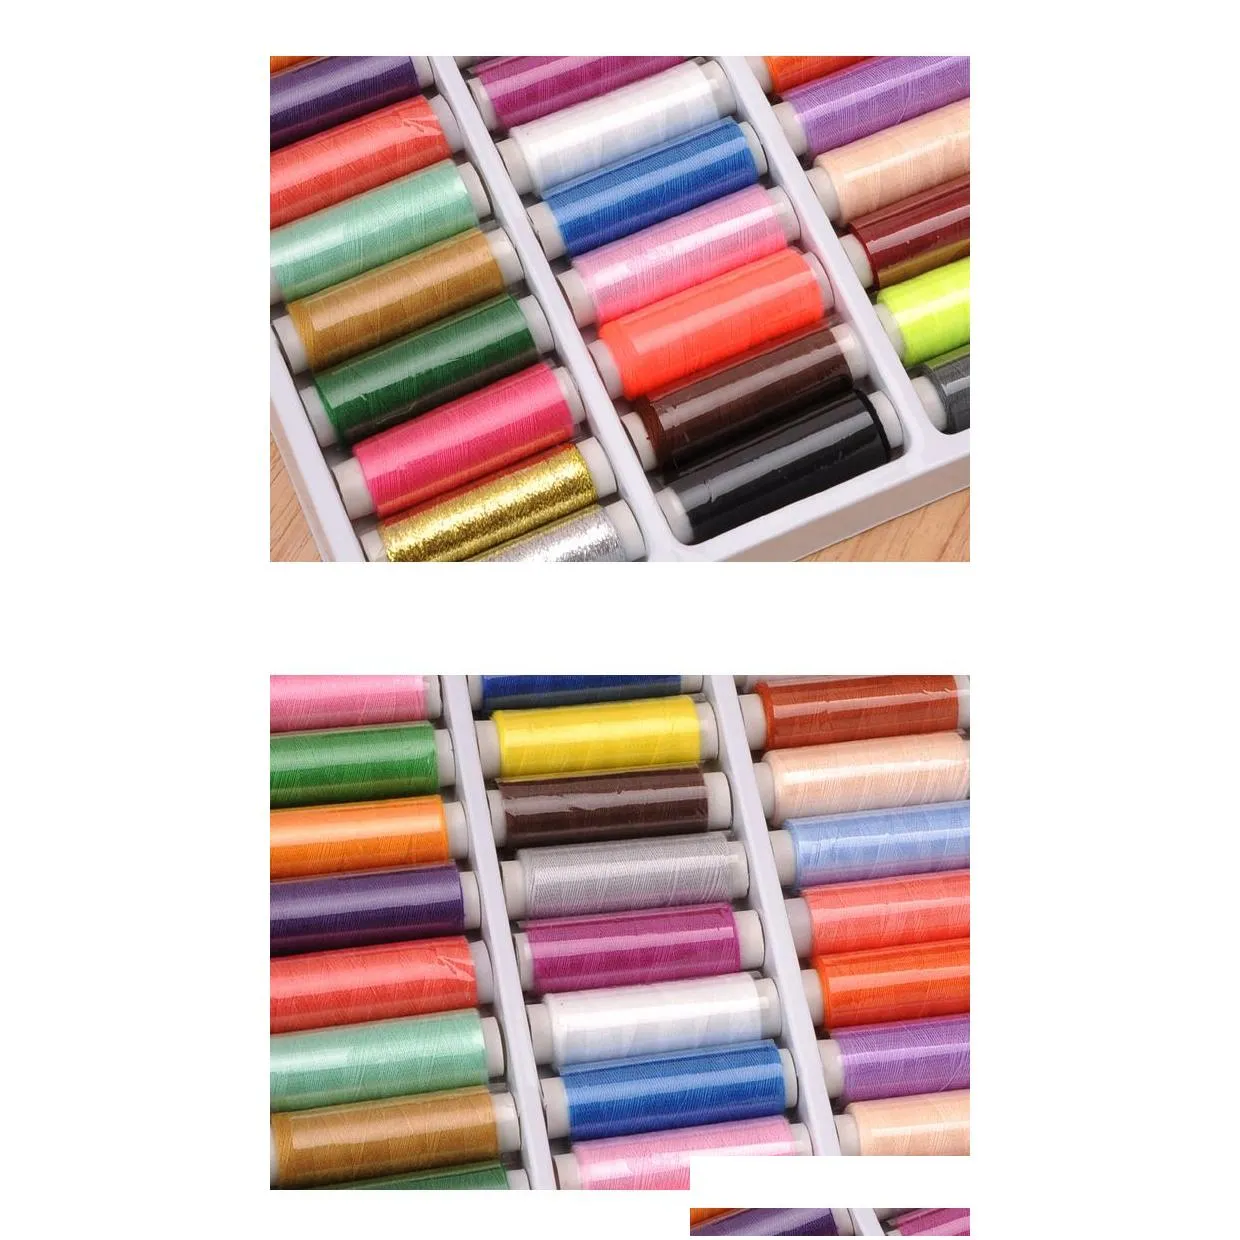 39rollset no402 mixed color sewing thread spolyestersewing supplies for hand machine thread to sew 8589876